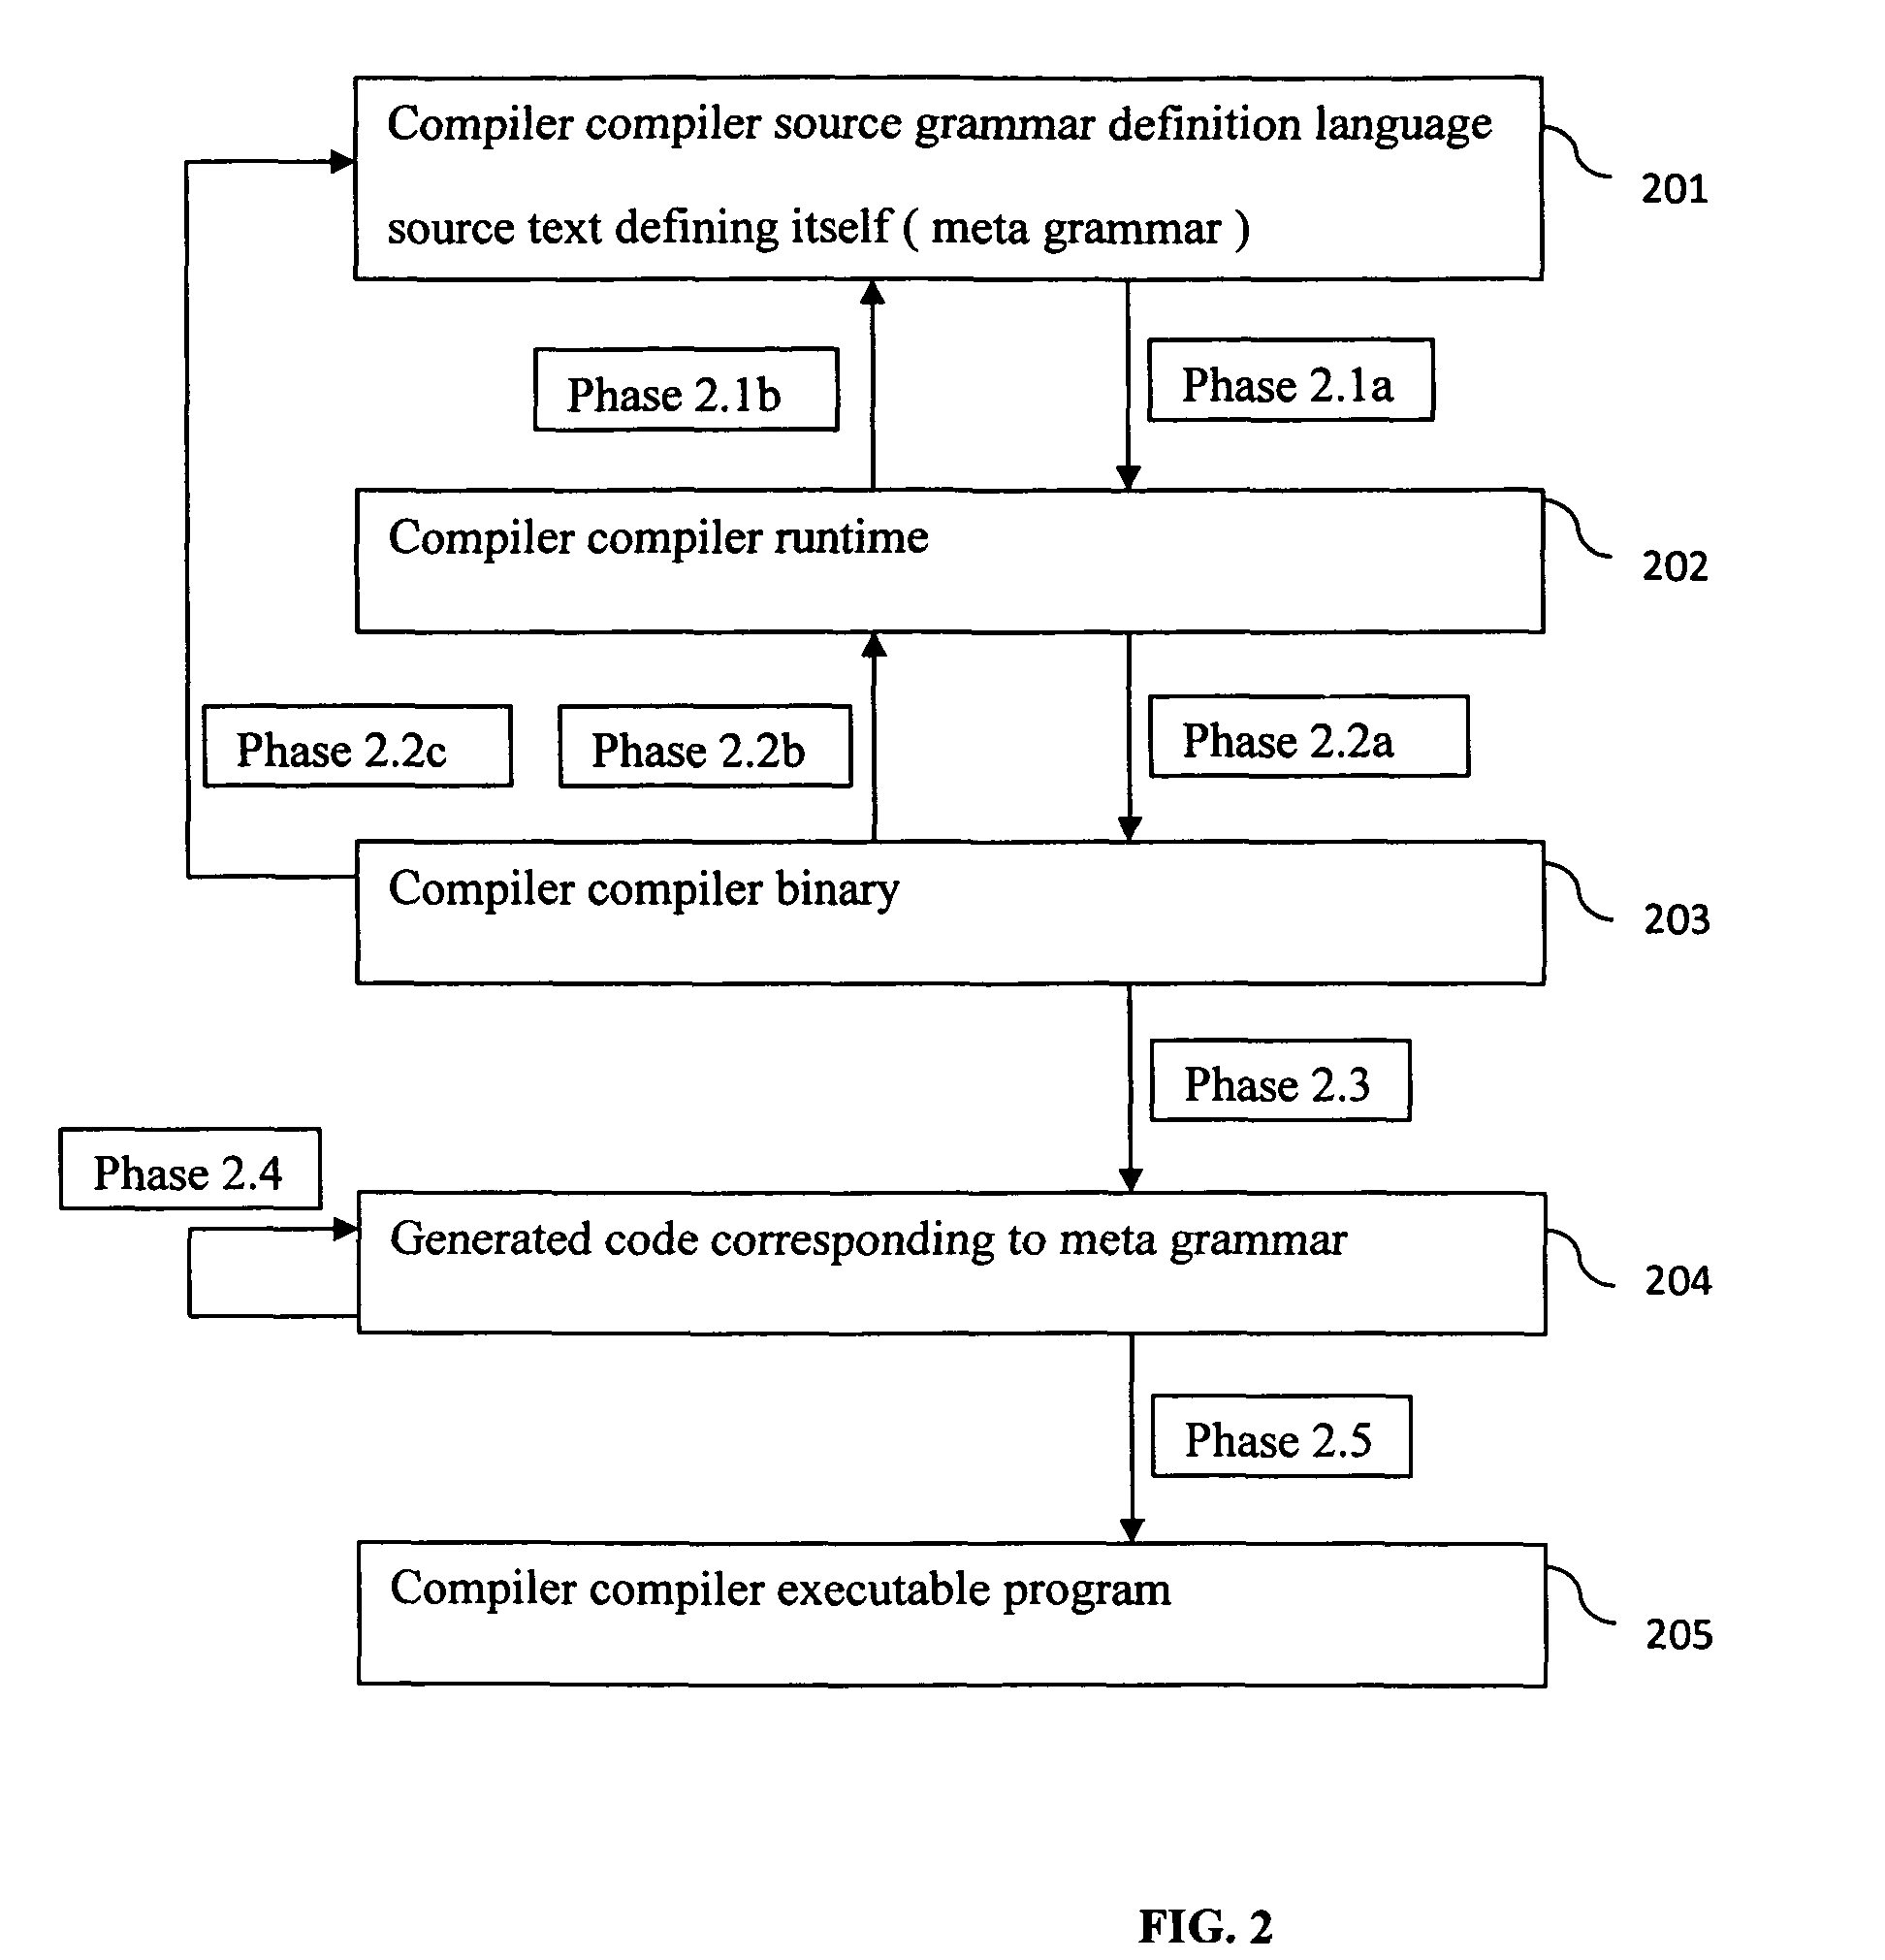 Compiler compiler system with syntax-controlled runtime and binary application programming interfaces